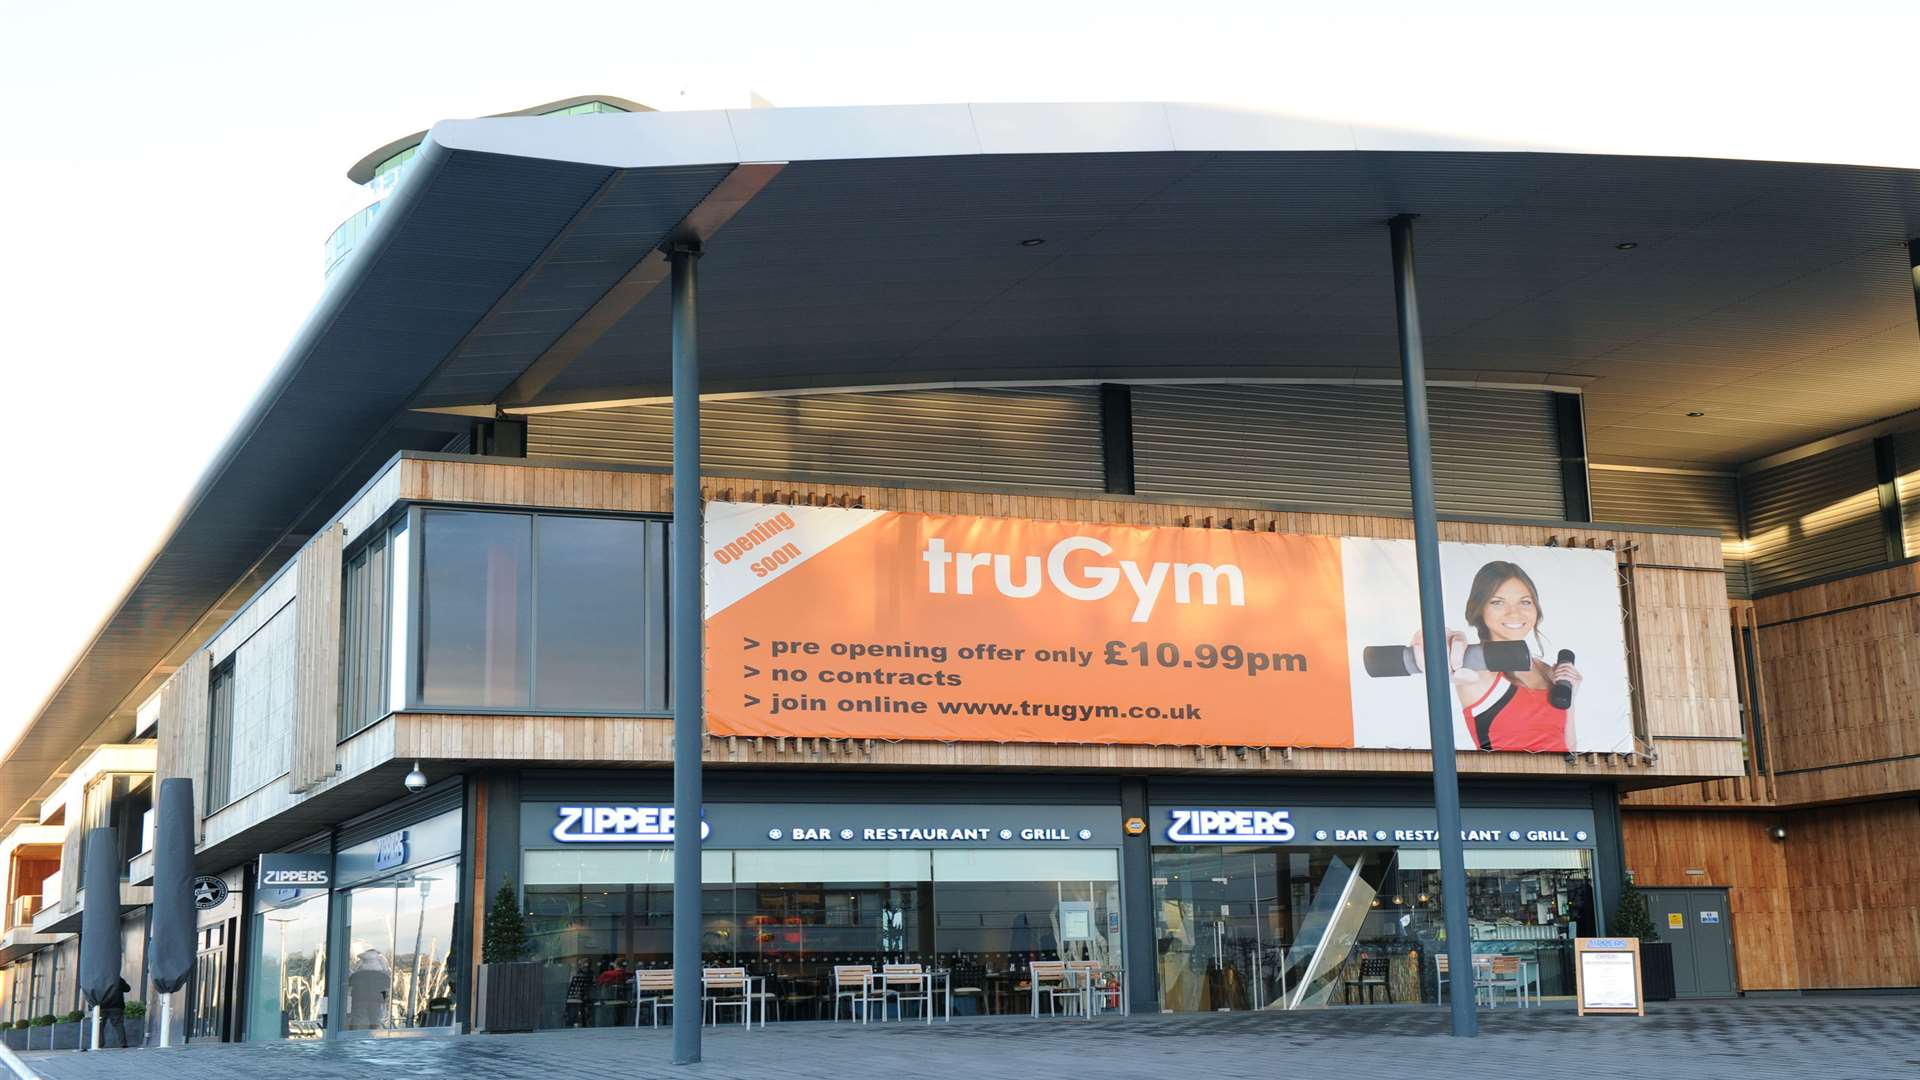 TruGym will be opening on April 20.